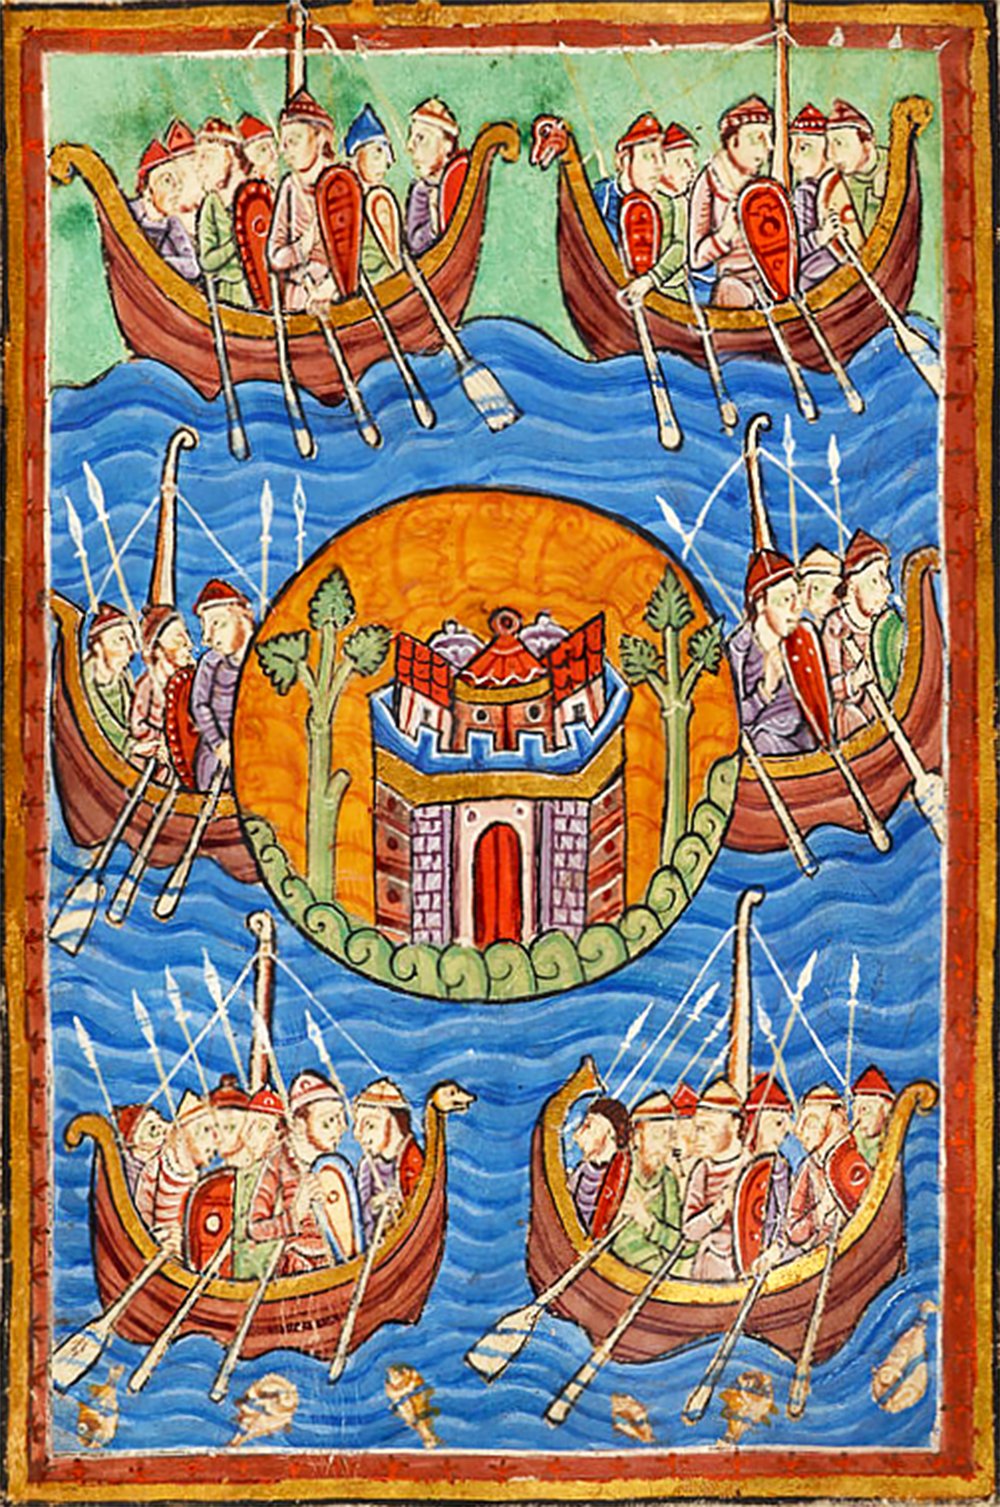 Illustration from “Edmund of England”' showing Vikings in helmets and armed with shields and spears, rowing six ships towards a city on a circular island, framed by two trees. Fish are visible in the surrounding waters.